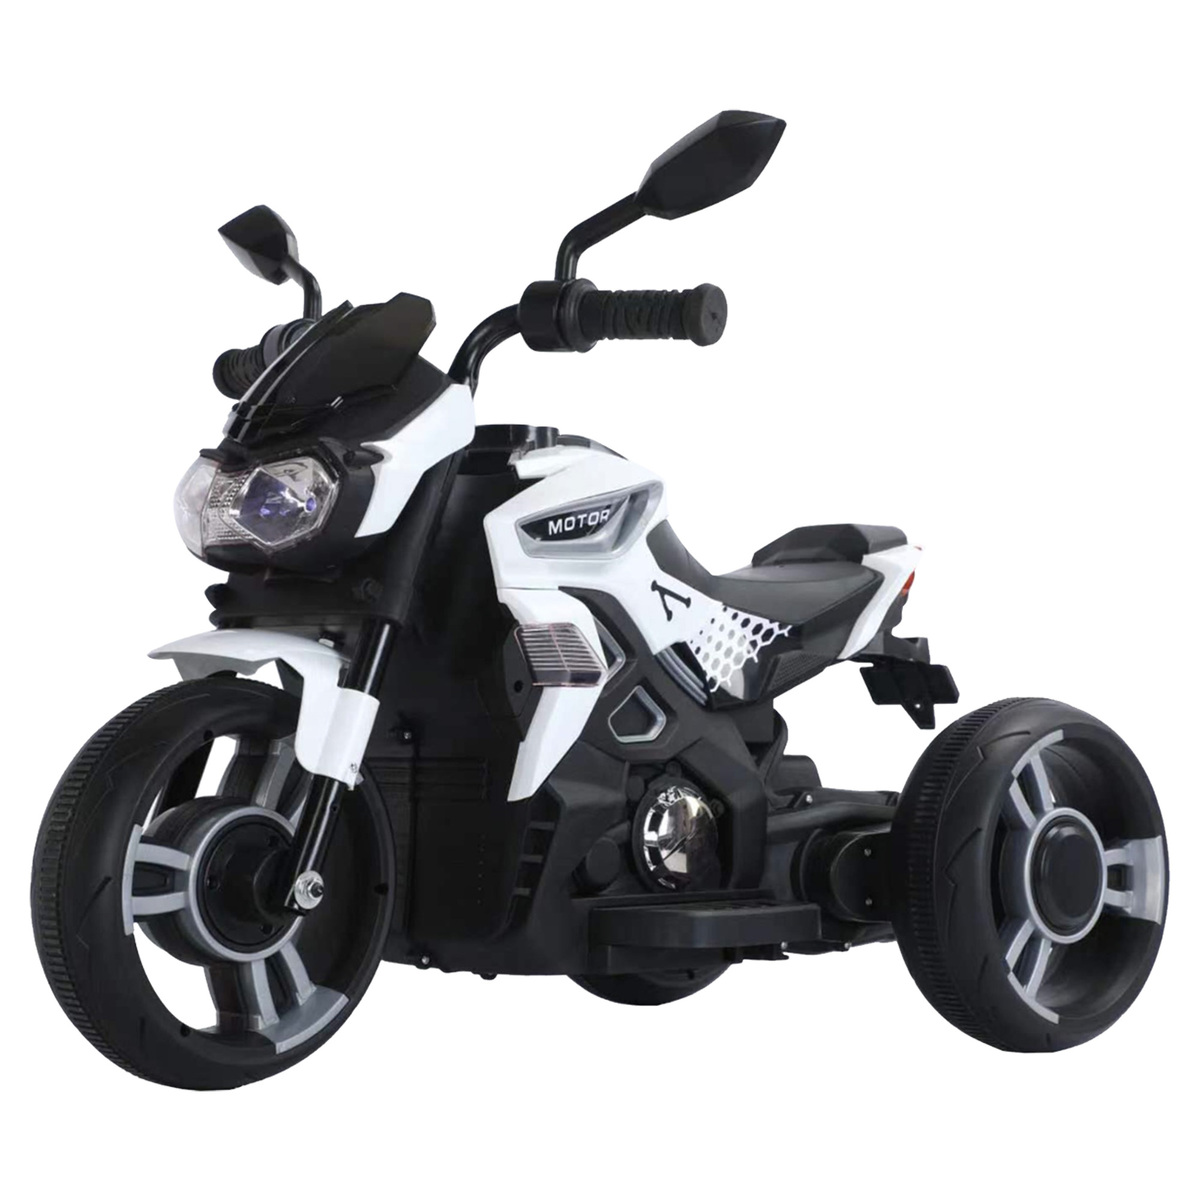 Skid Fusion Rechargeable Kids Motor Bike 3430017-3A Assorted